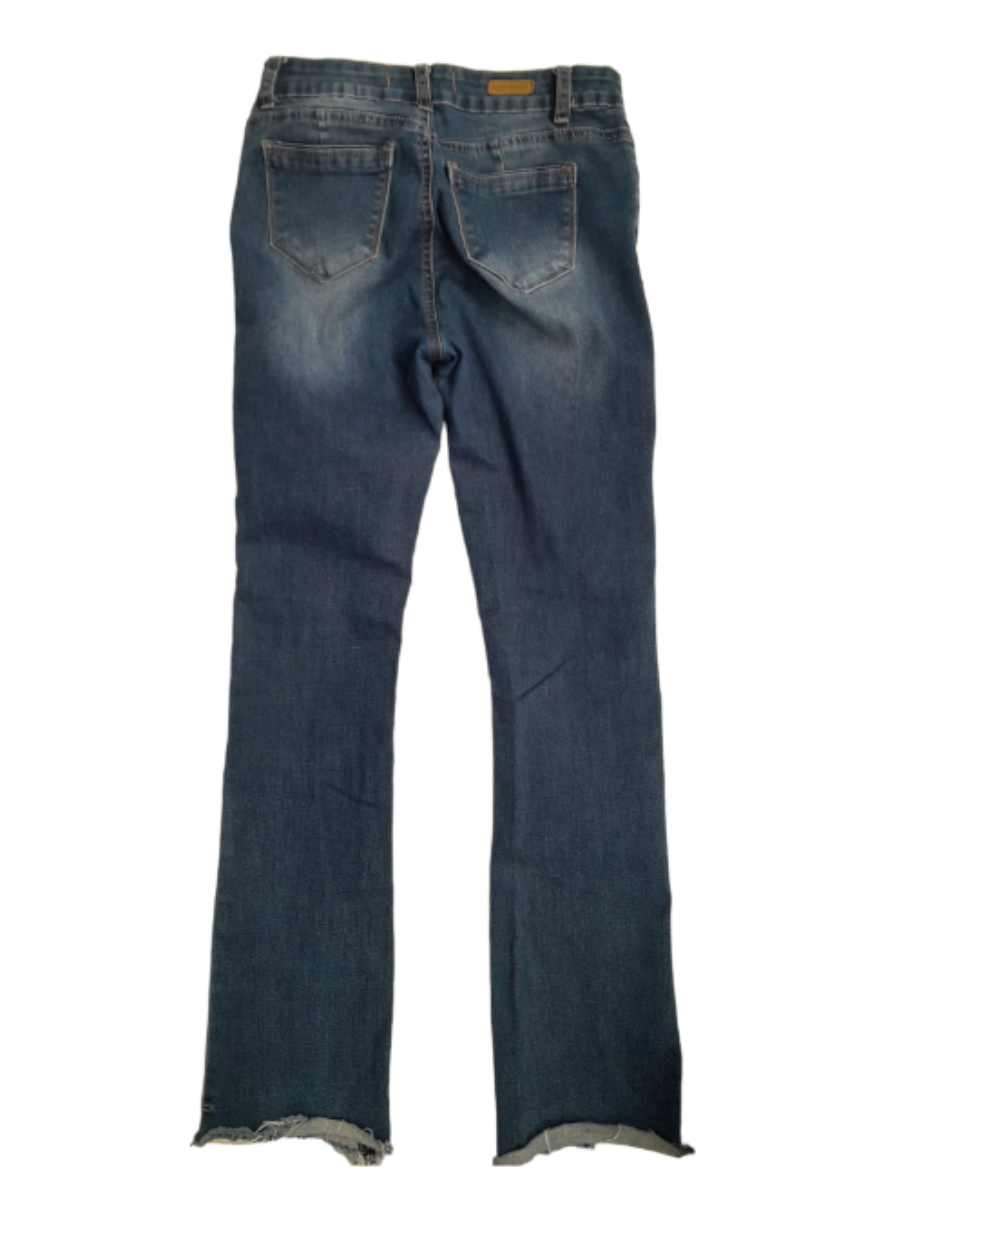 Jeans Rasgados Most Wanted